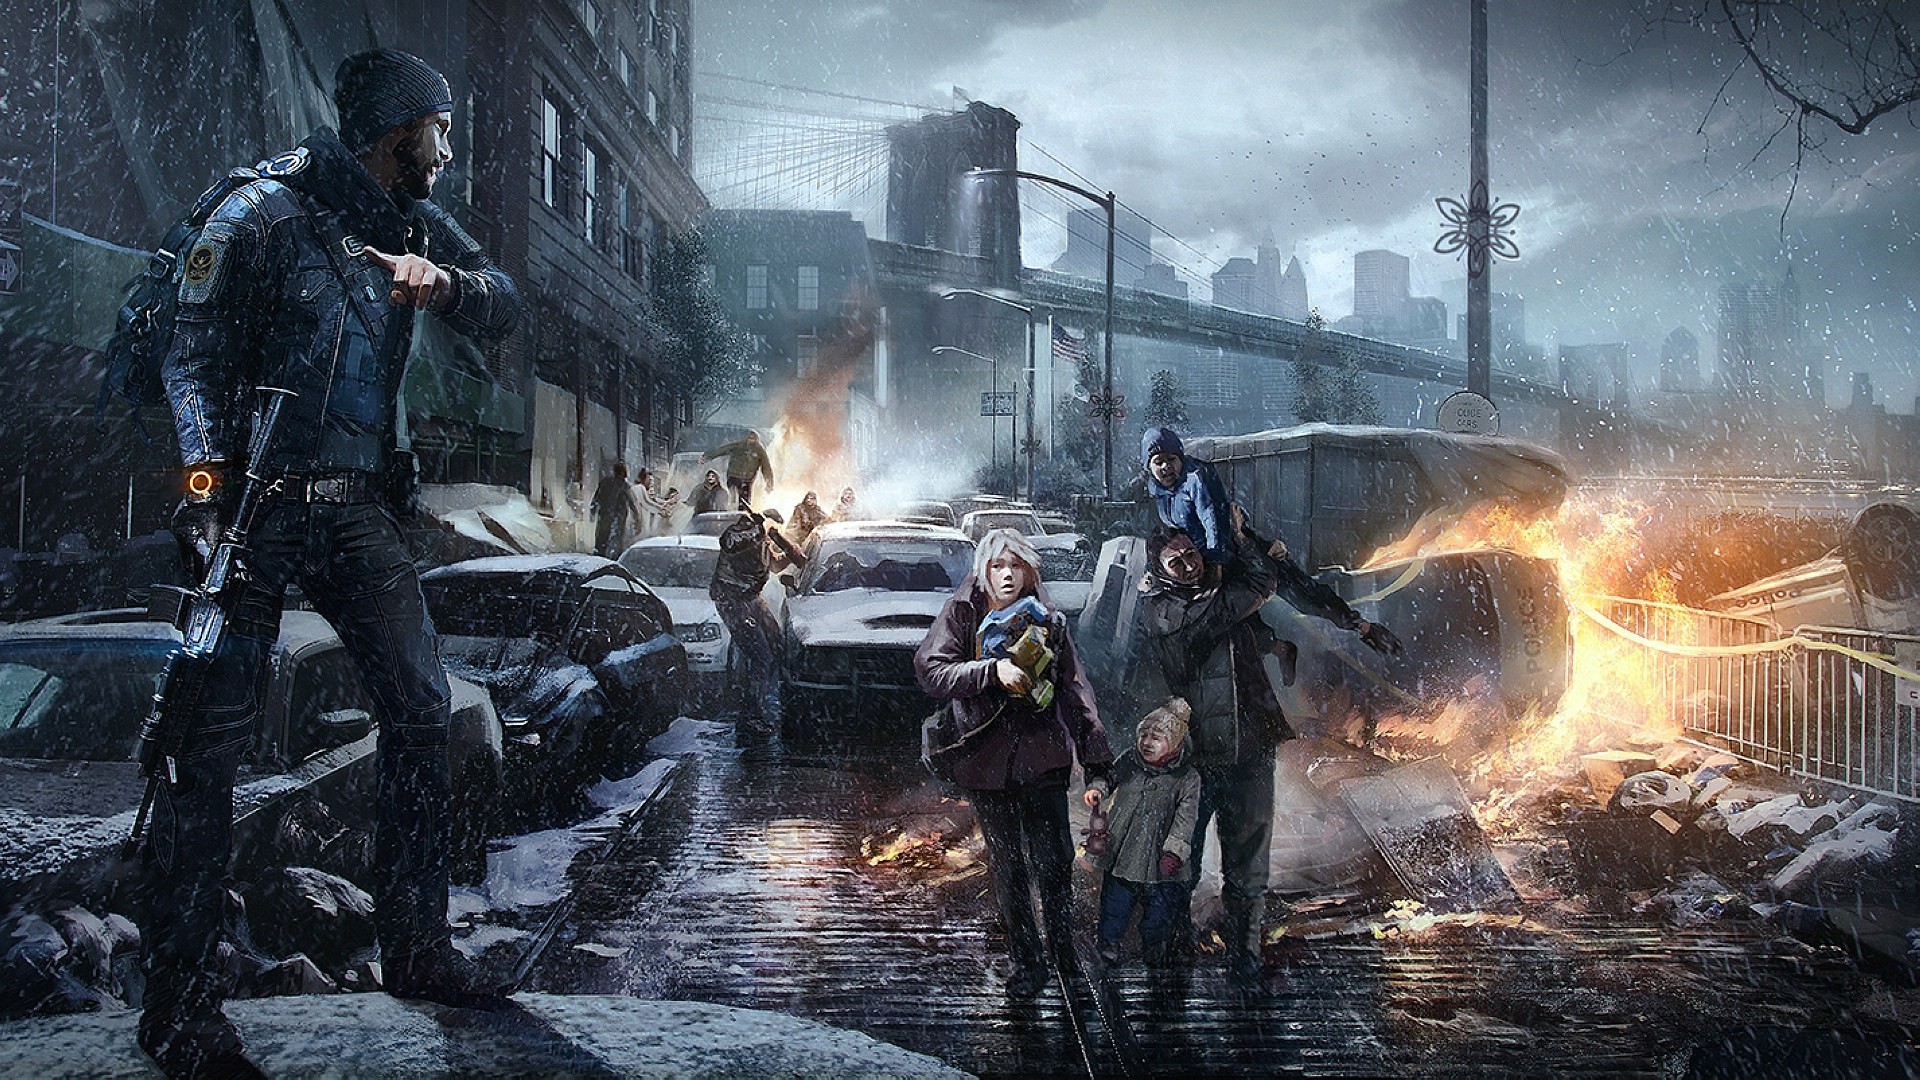 The Division Wallpaper 1920x1080 ① Download Free Beautiful Full Hd